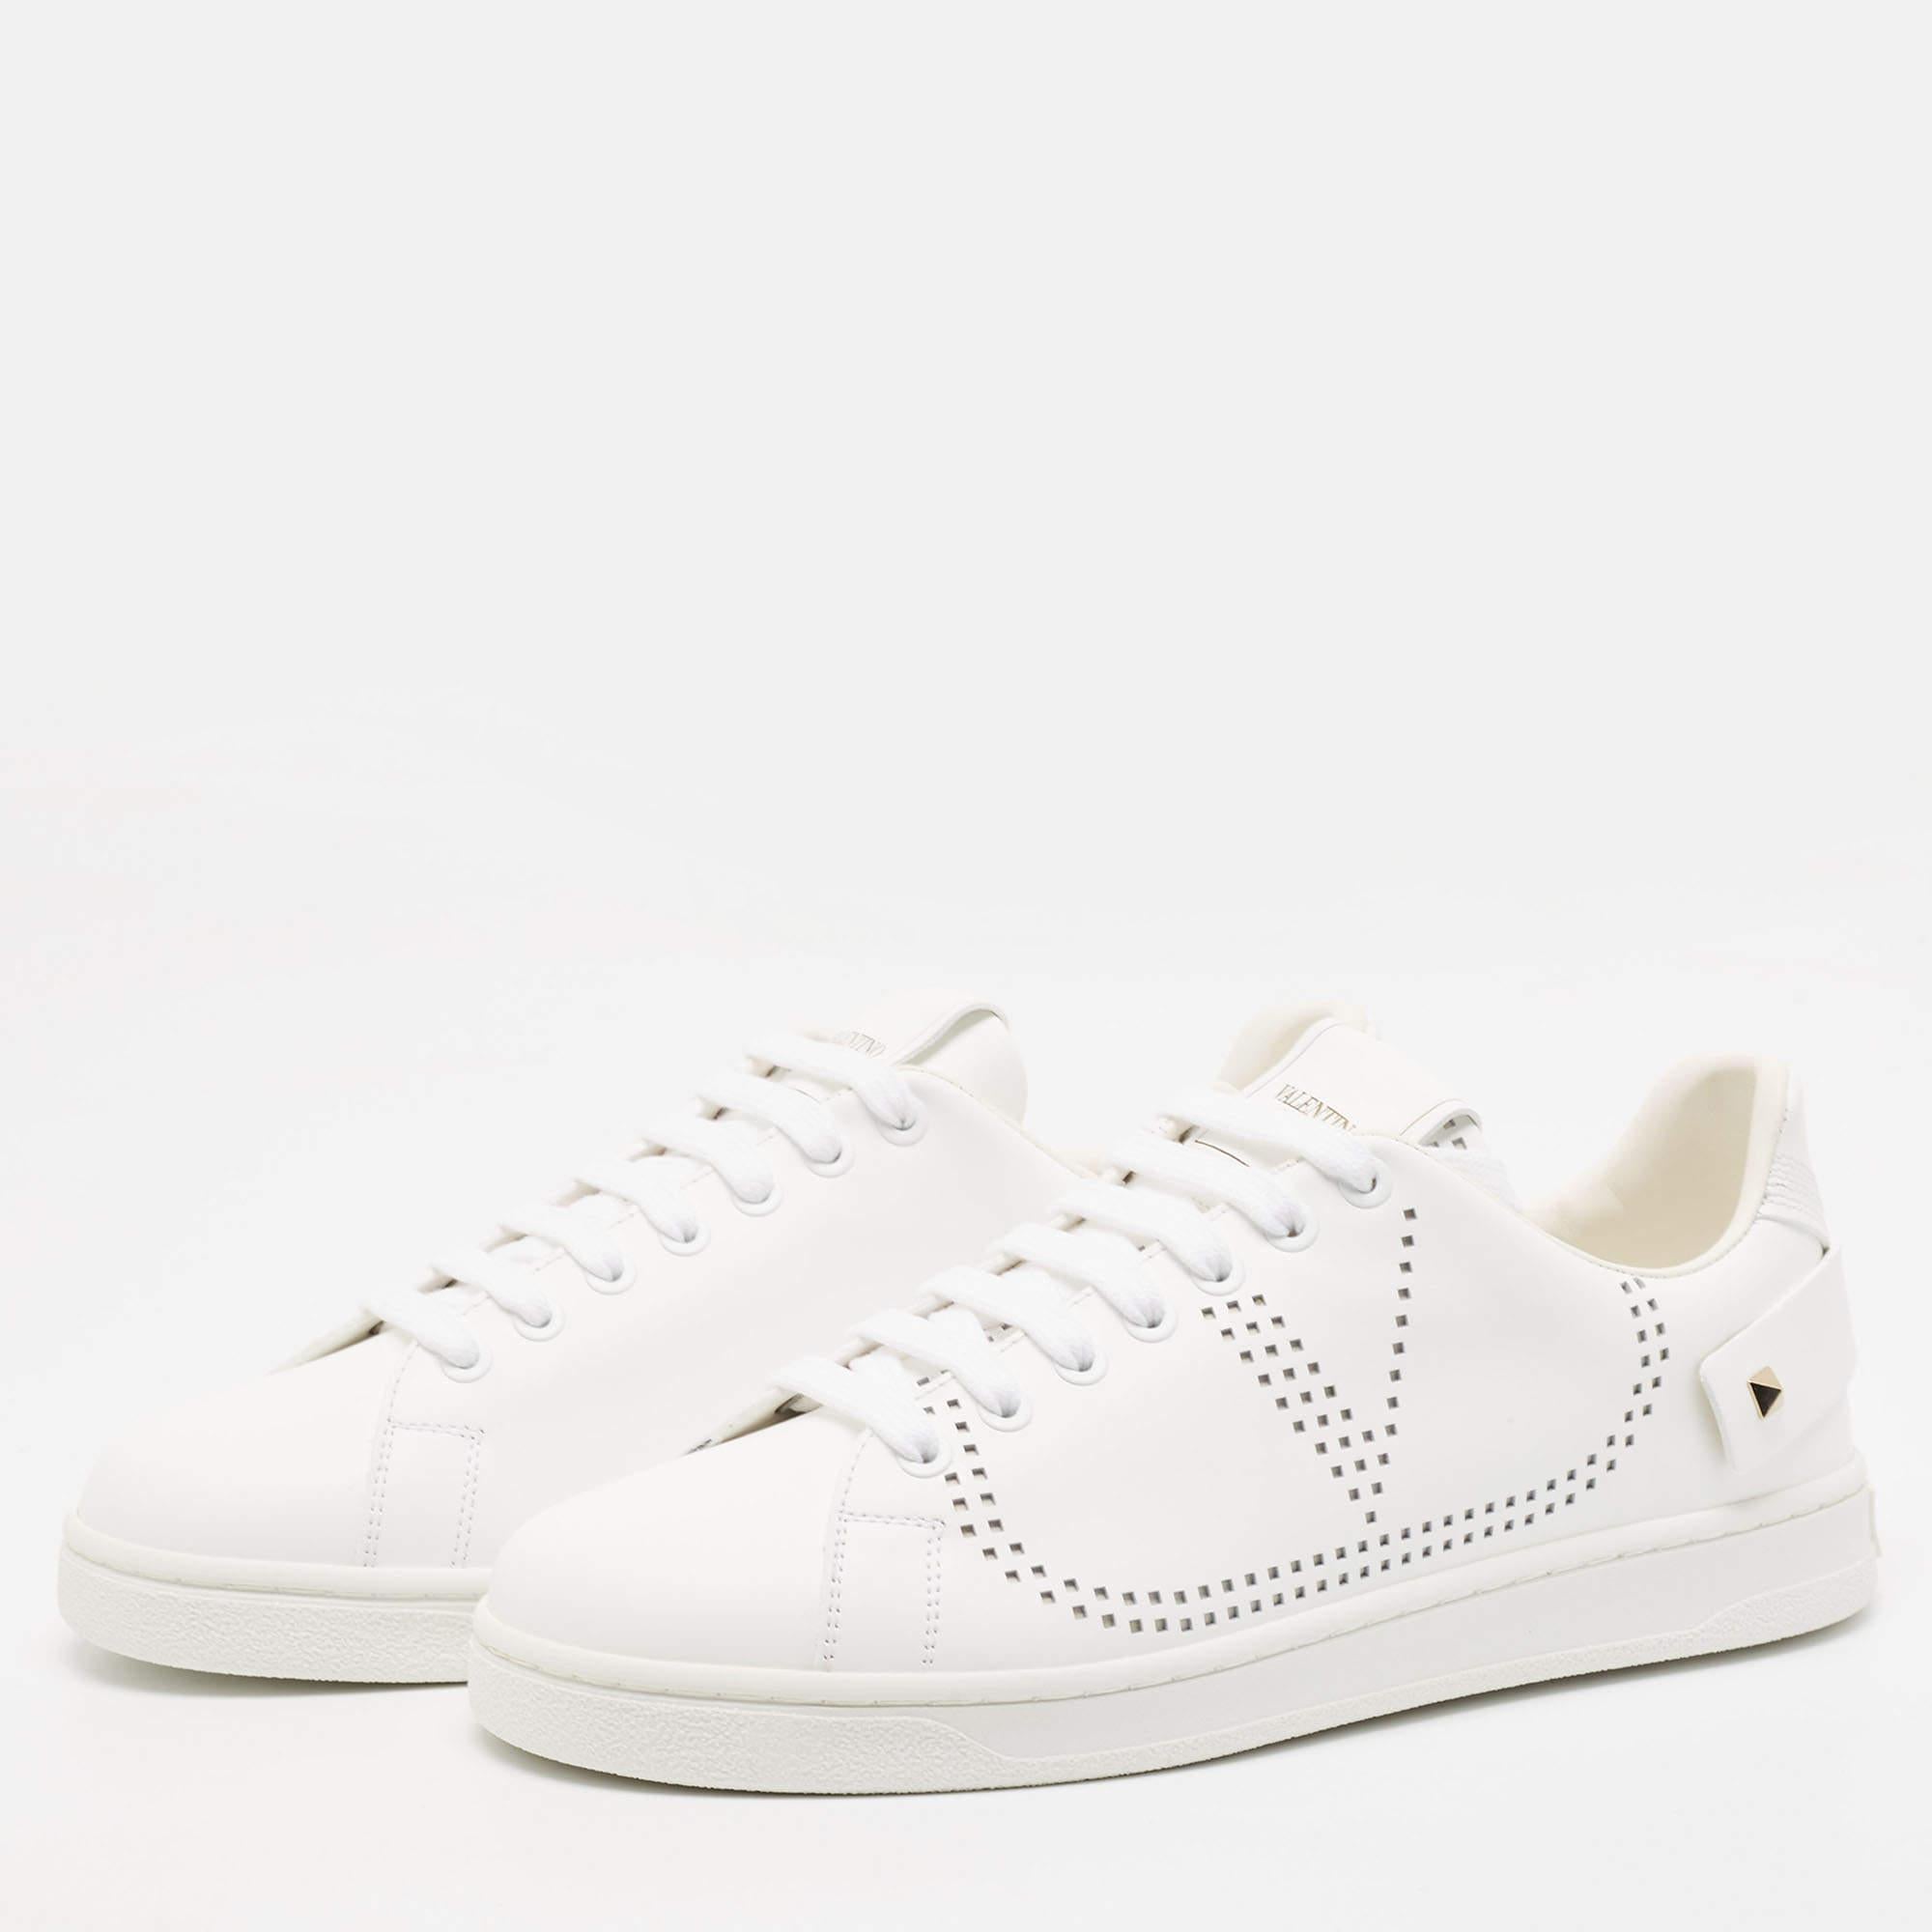 Valentino White Leather Rockstud Low Top Sneakers Size 39.5 3